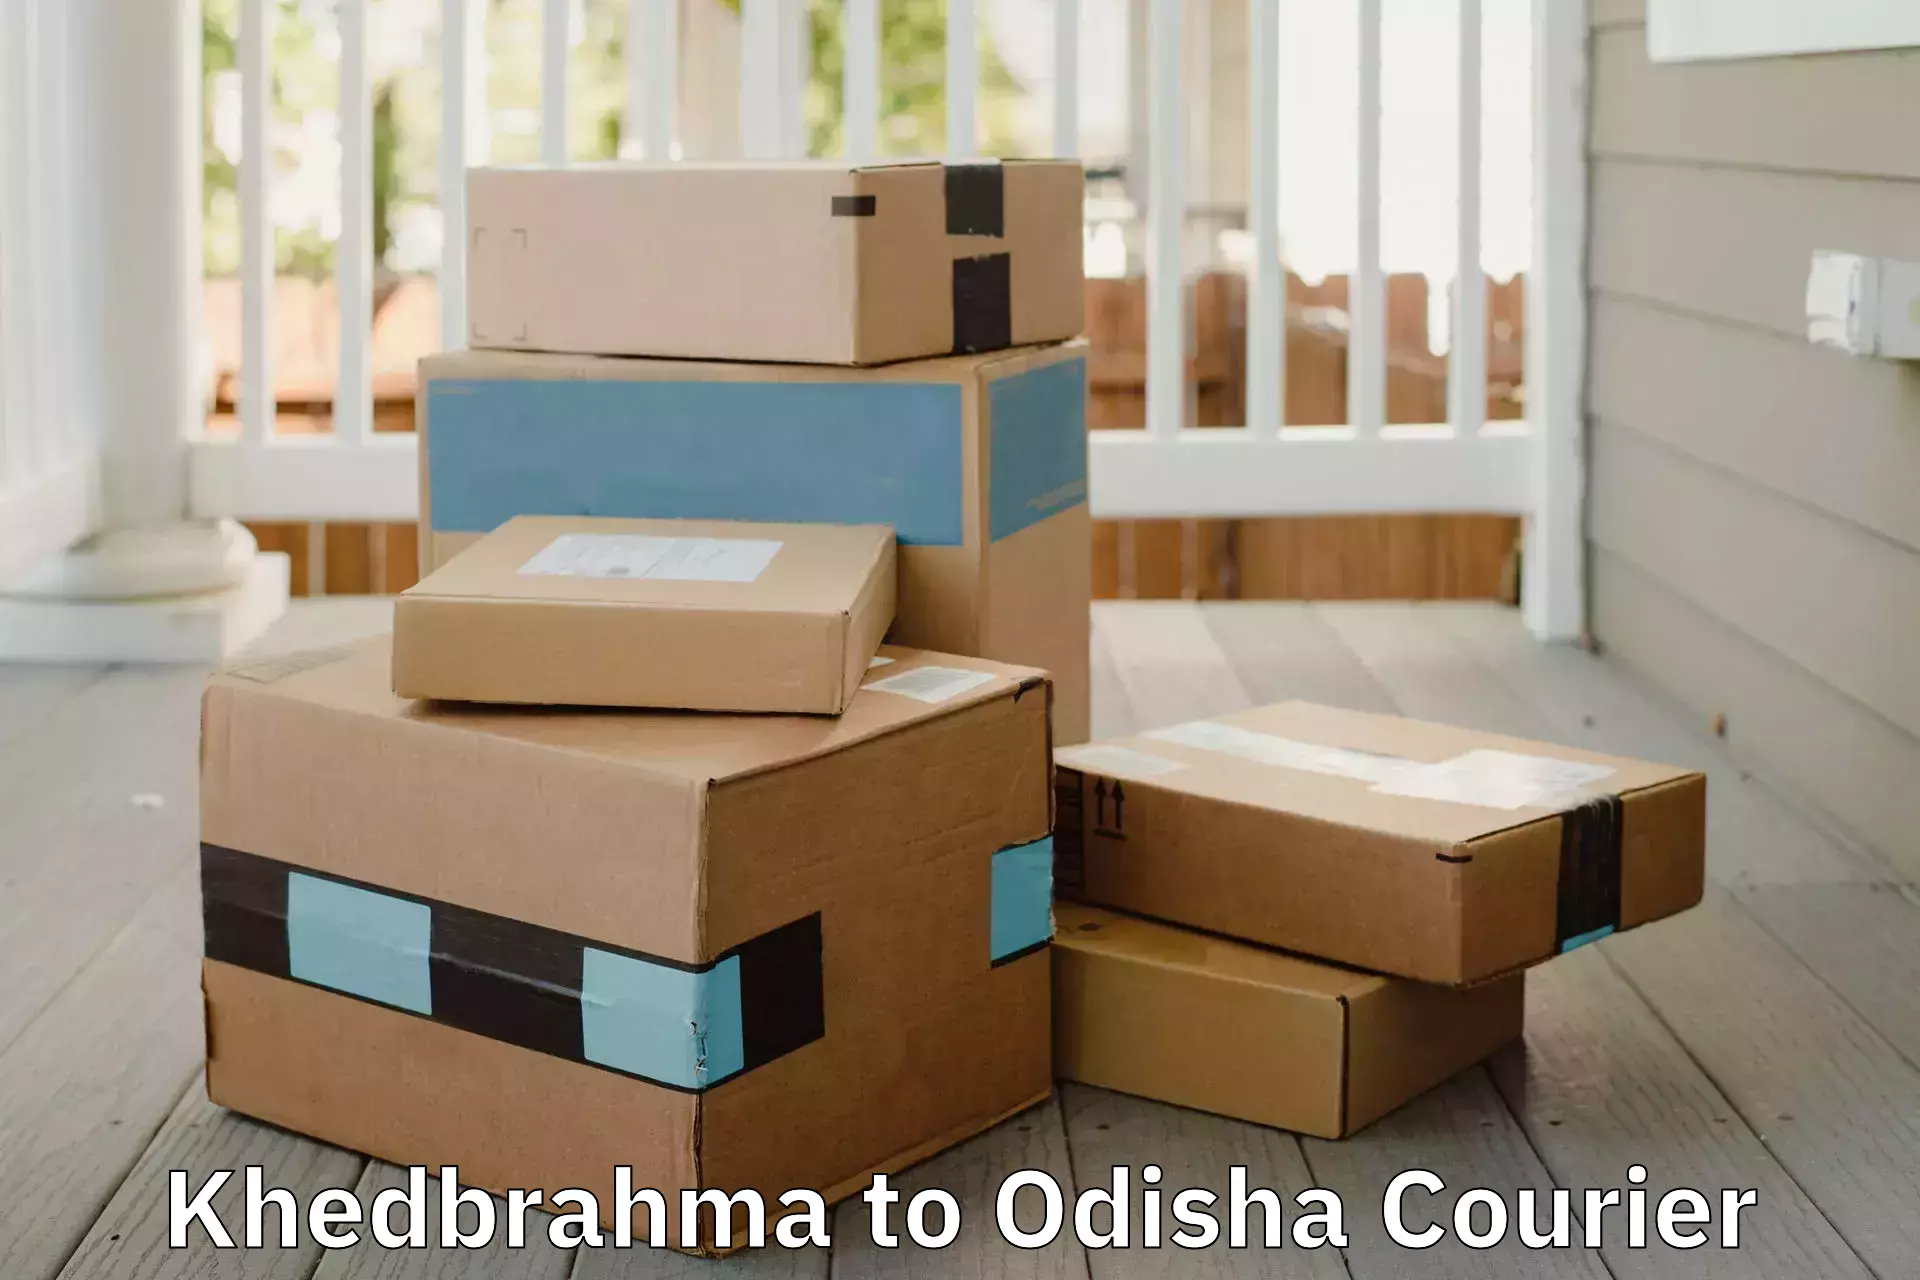 Affordable moving services in Khedbrahma to Bhubaneswar